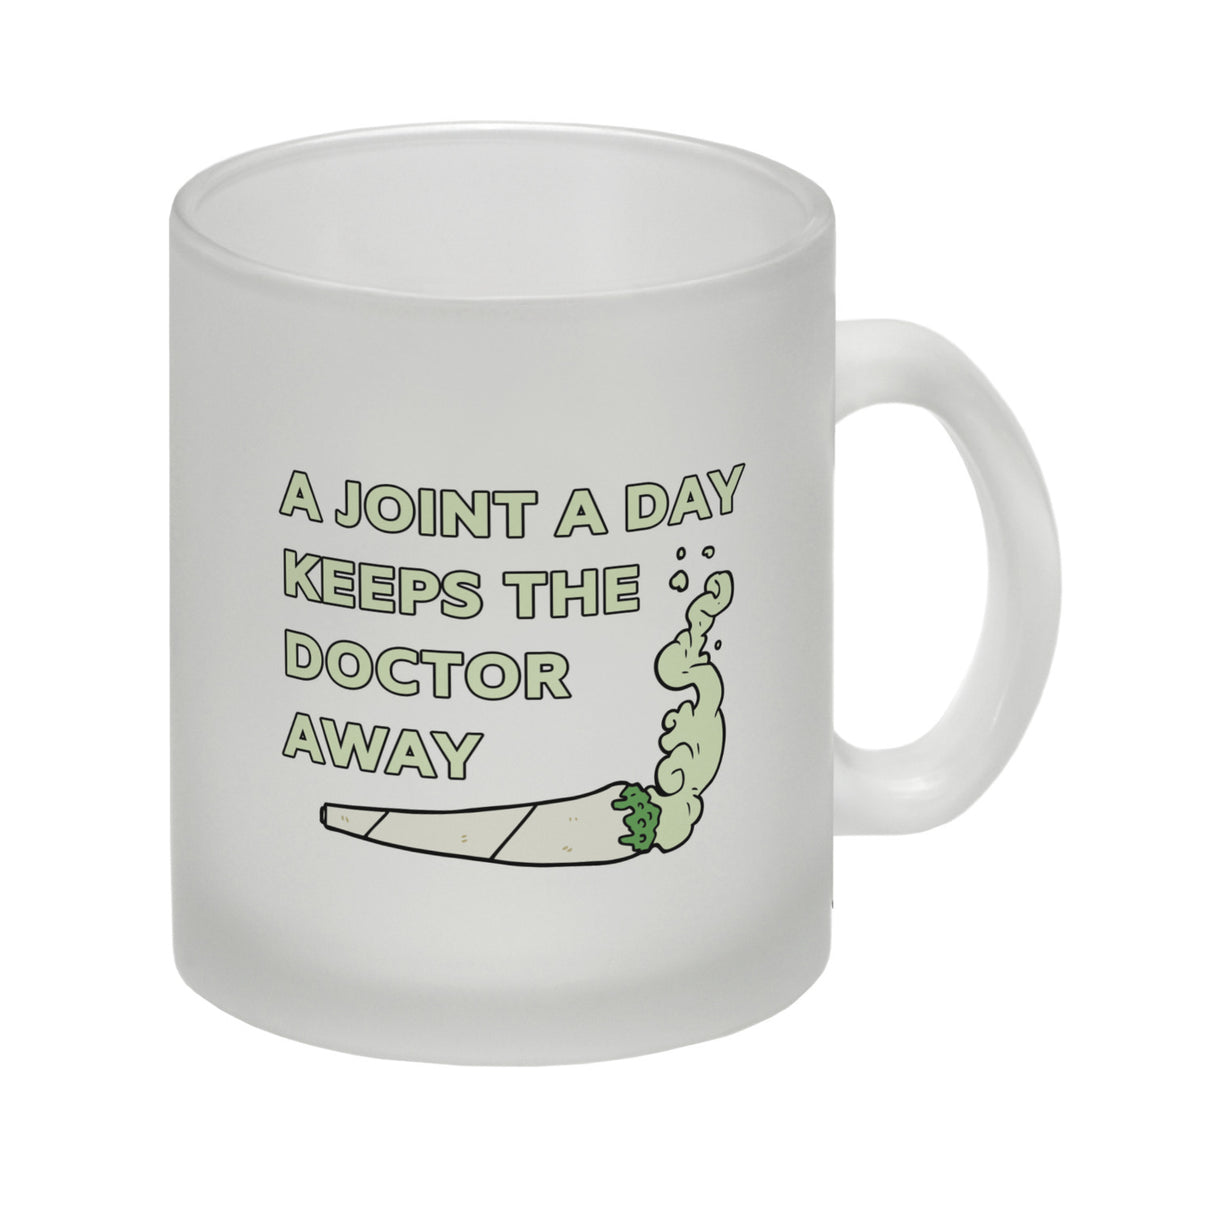 A Joint A Day Keeps The Doctor Away Kaffeebecher mit Spruch